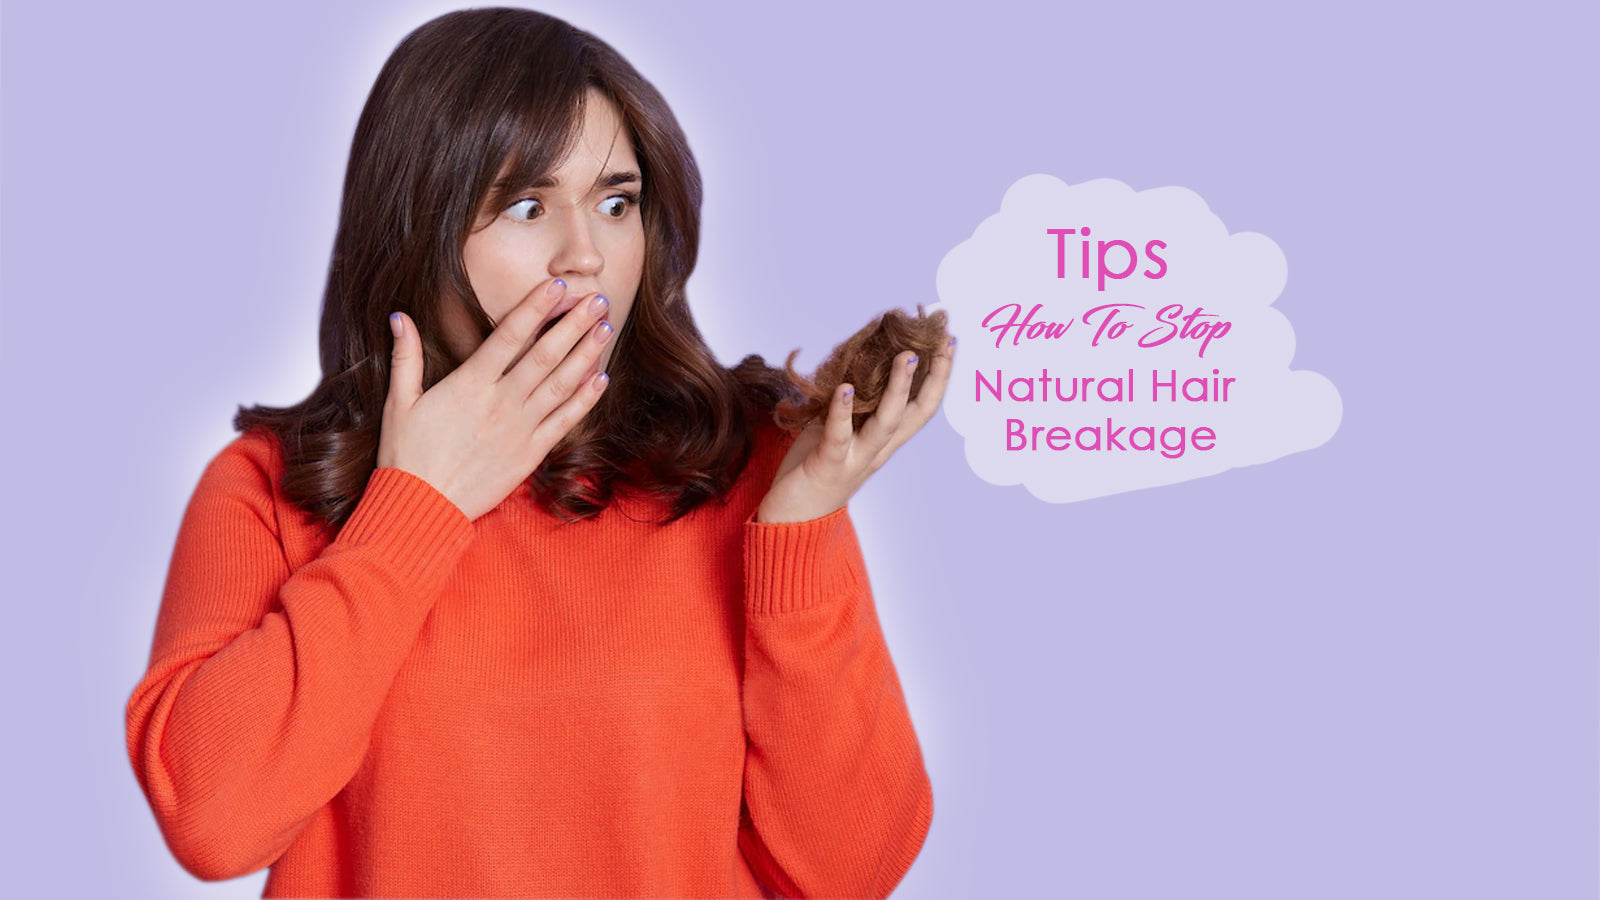 Tips To Stop Natural Hair Breakage